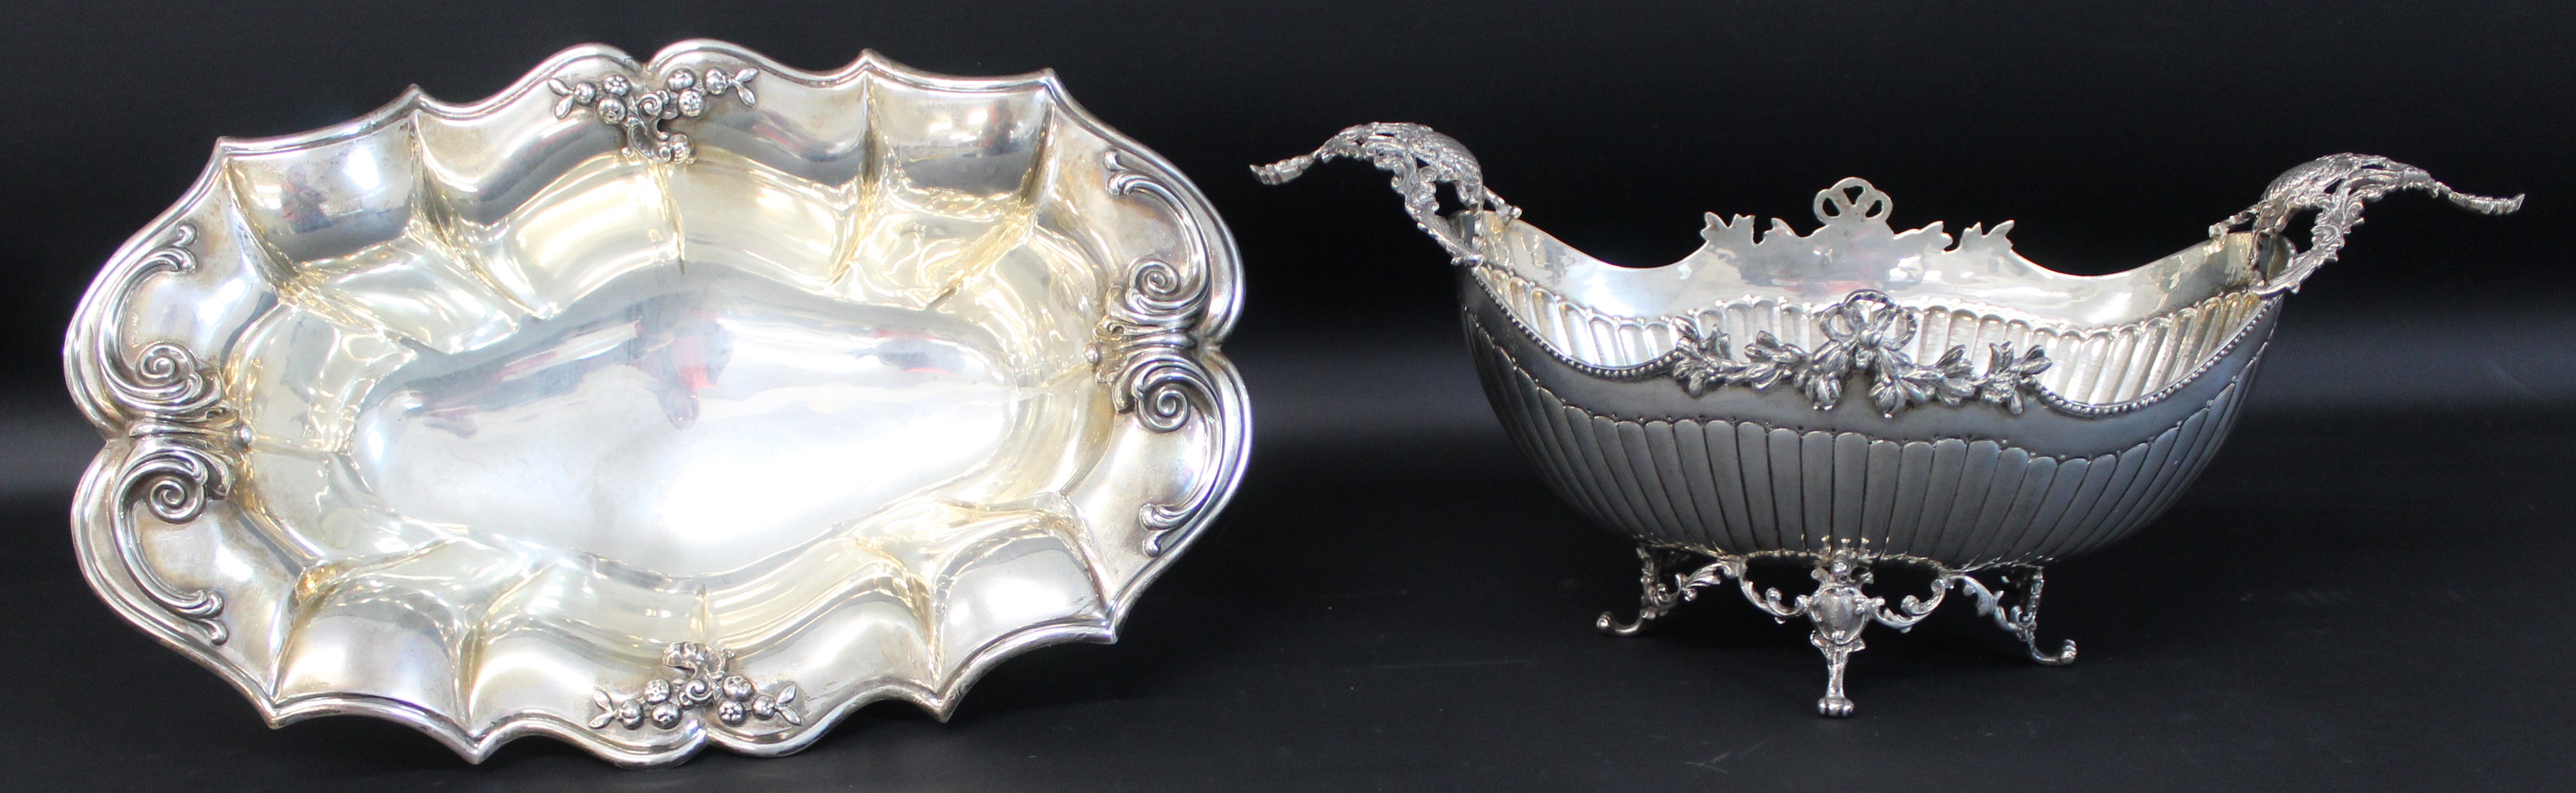 2 Italian silver bowls / dishes marked 800 (one marked possibly PA for Palermo), with embossed